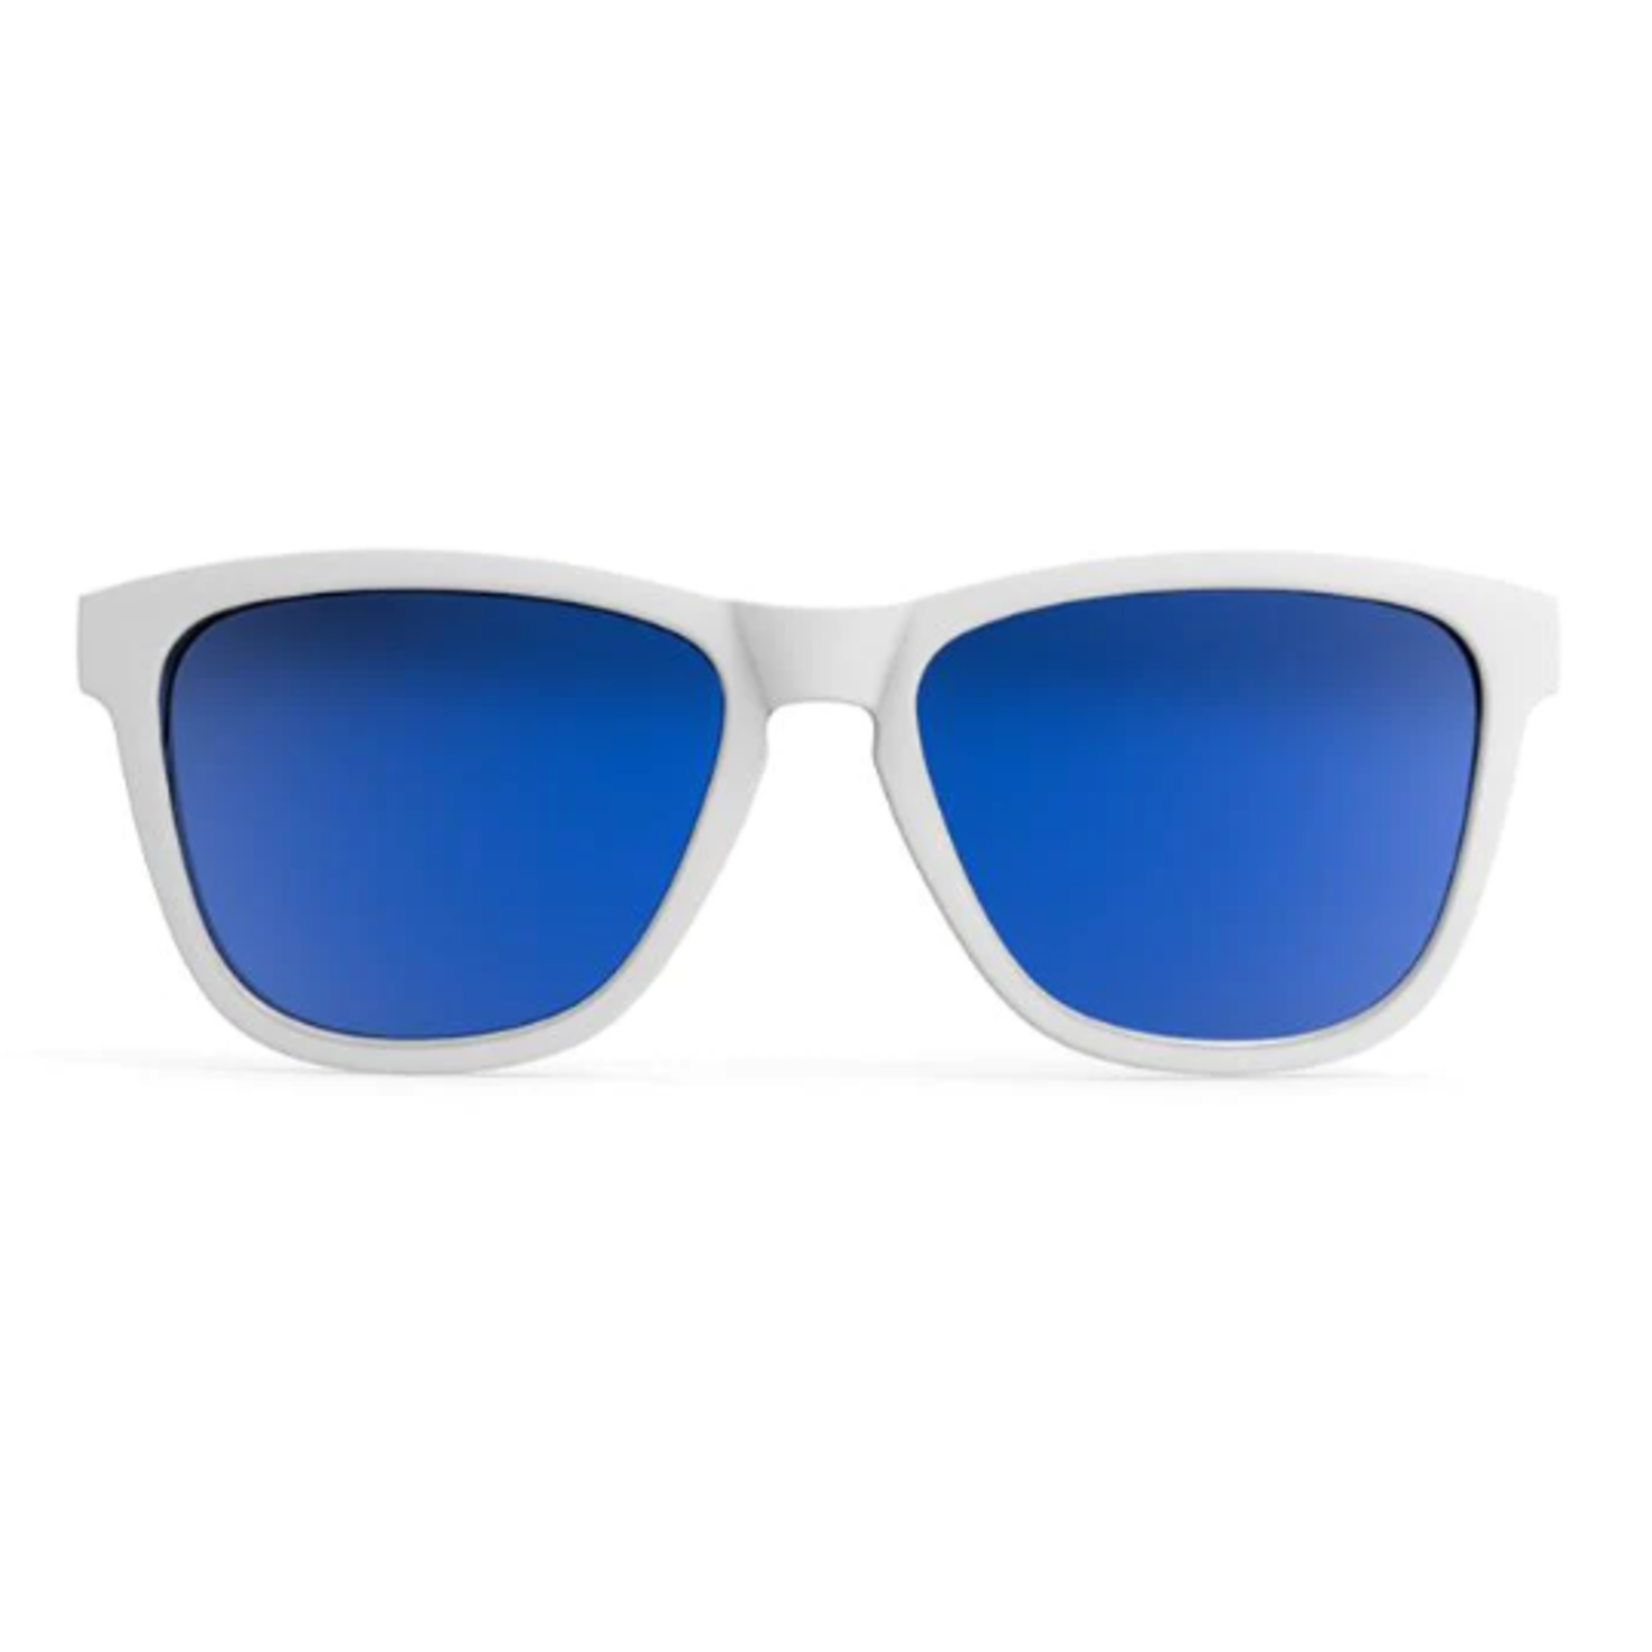 Goodr Sunglasses, Iced by yetis